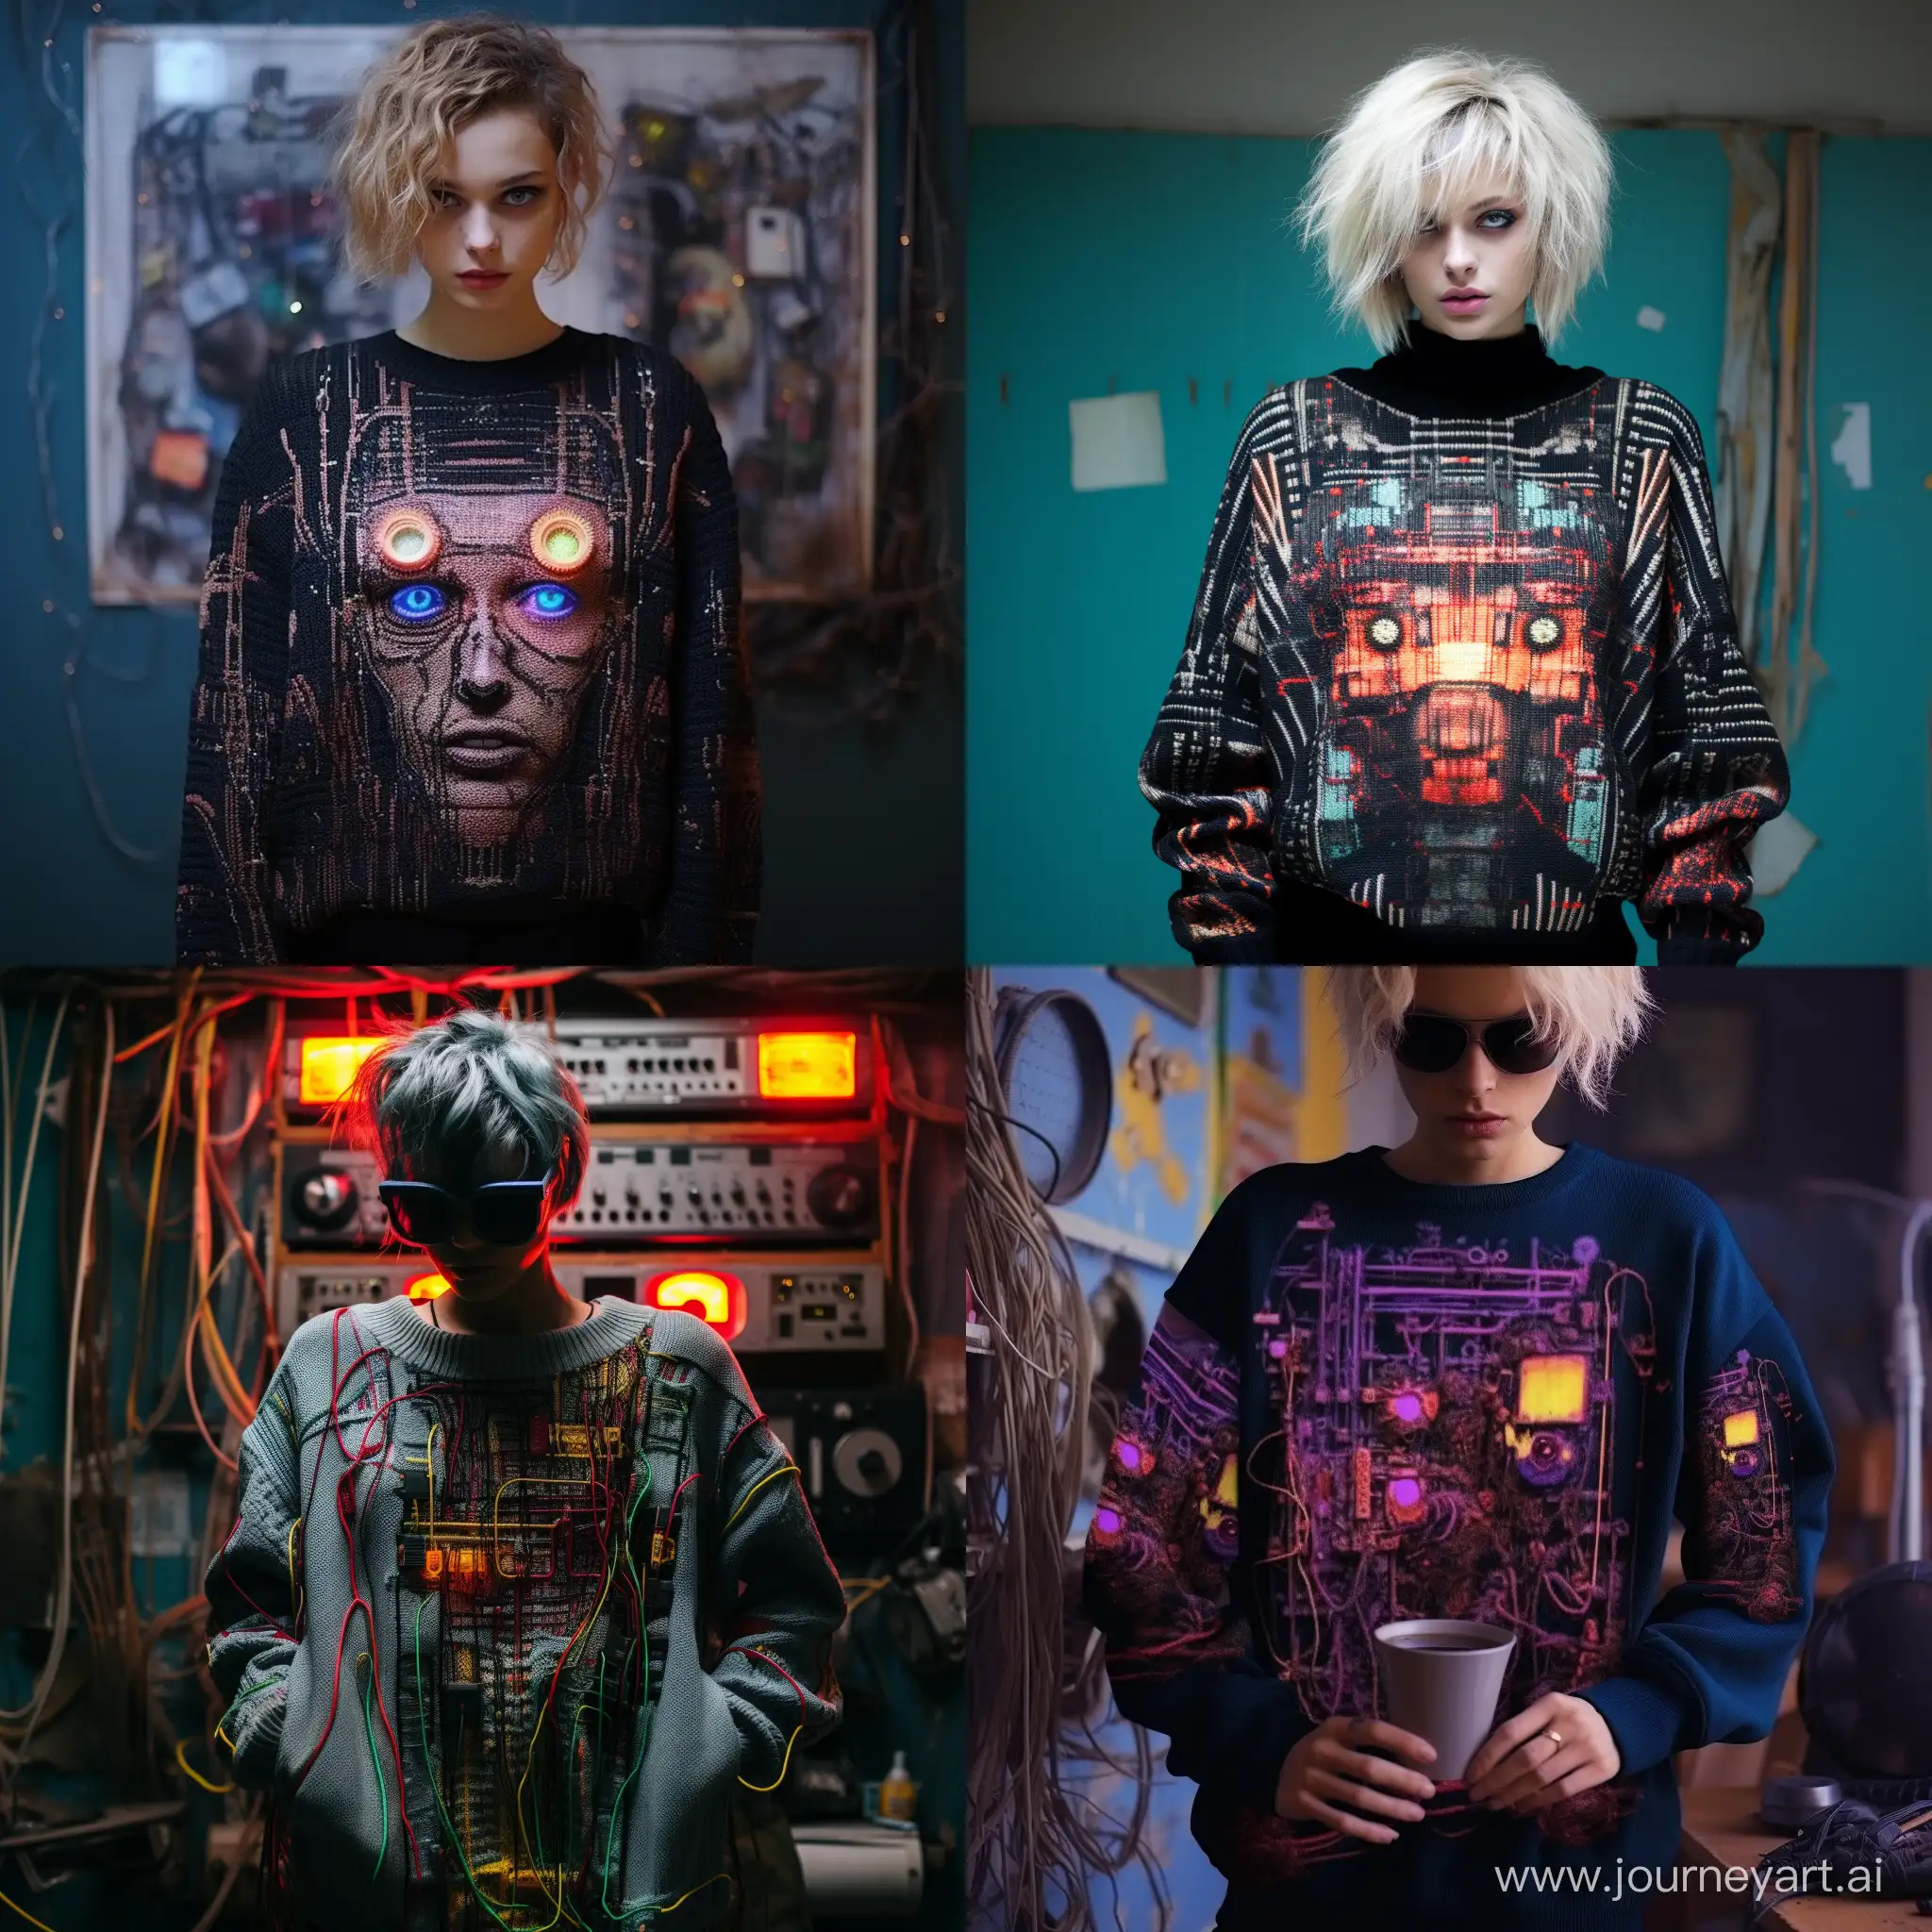 A photo of an oversize knitted sweater with a flat image on the sweater on which the computer controls the world, it conquered every person and plant, the image is connected from threads, punk style of the 80s, cyberpunk films